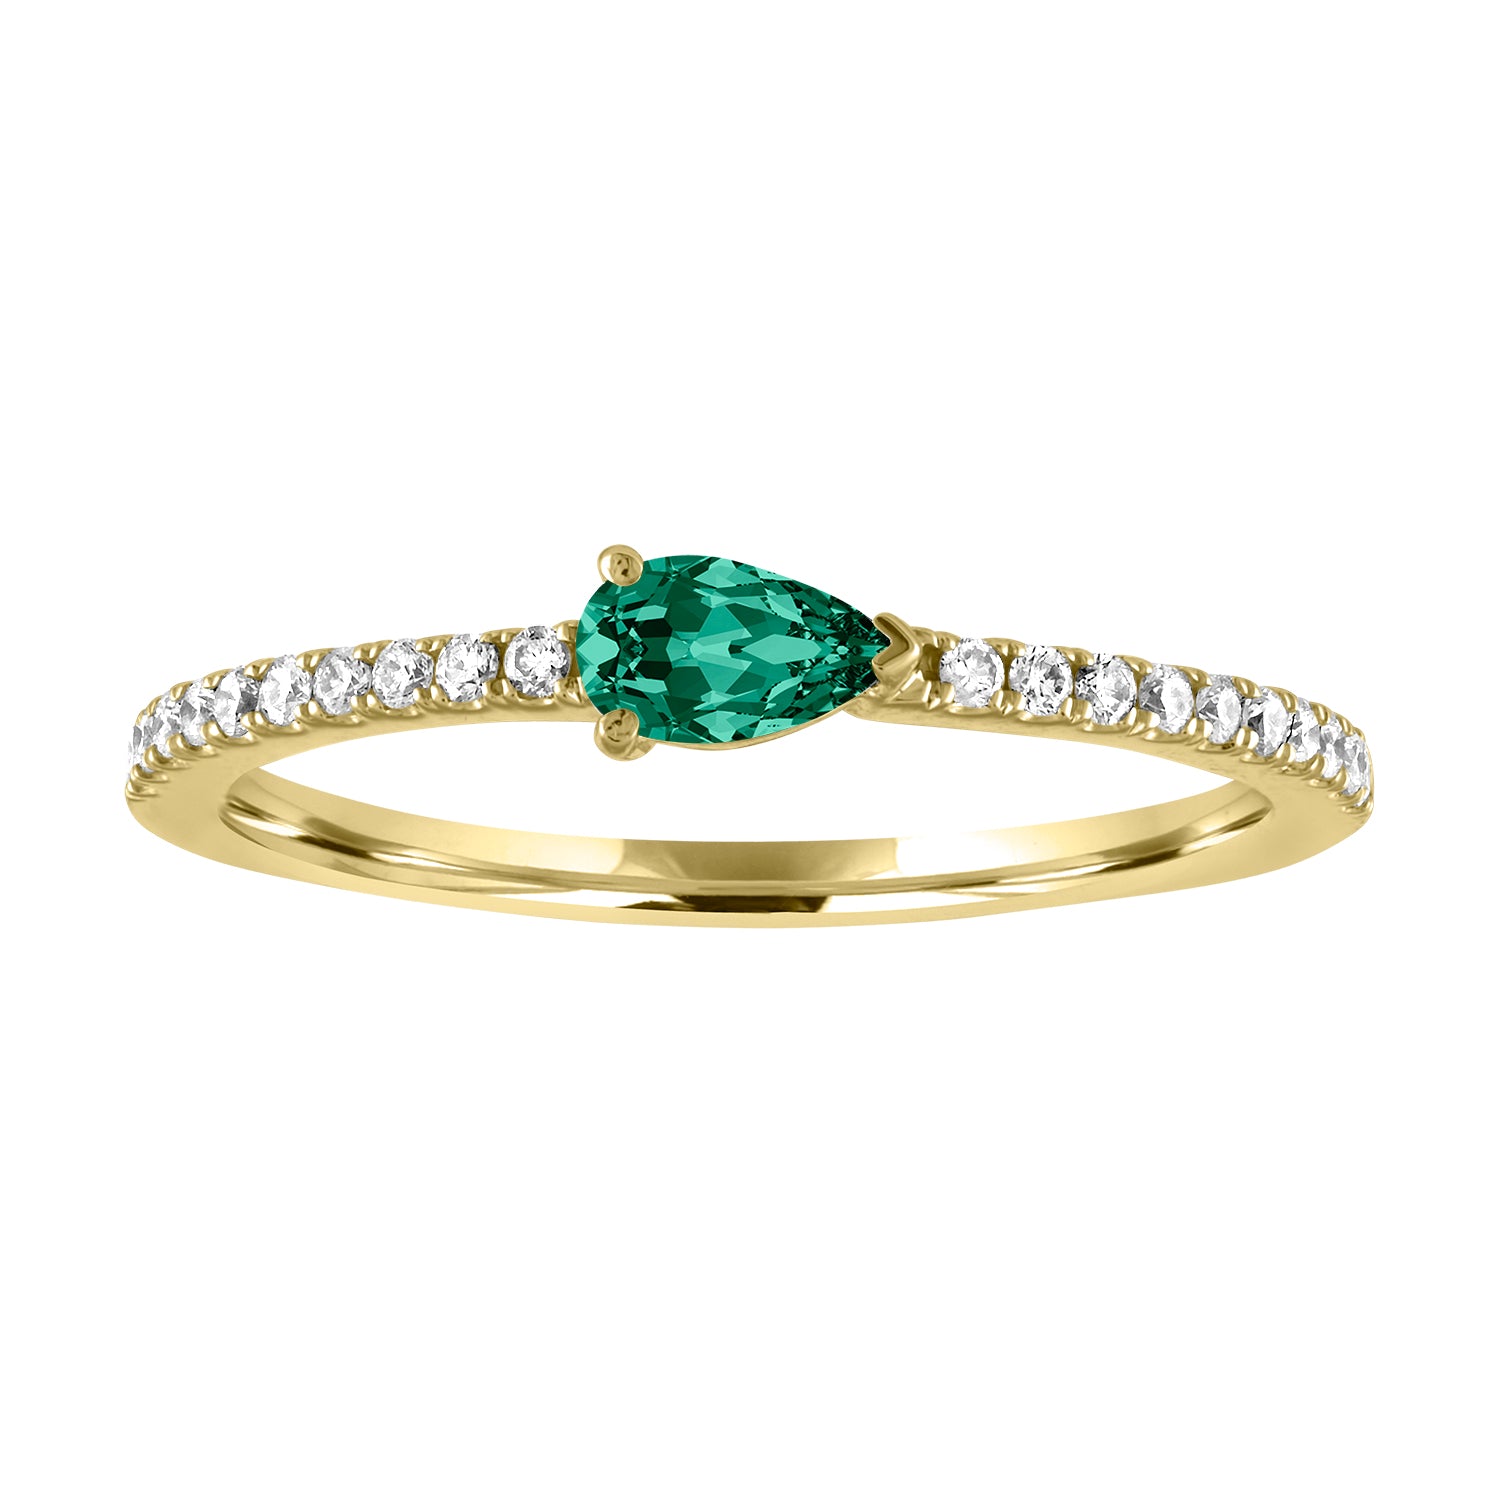 Yellow gold skinny band with a pear shaped emerald in the center and round diamonds on the shank. 